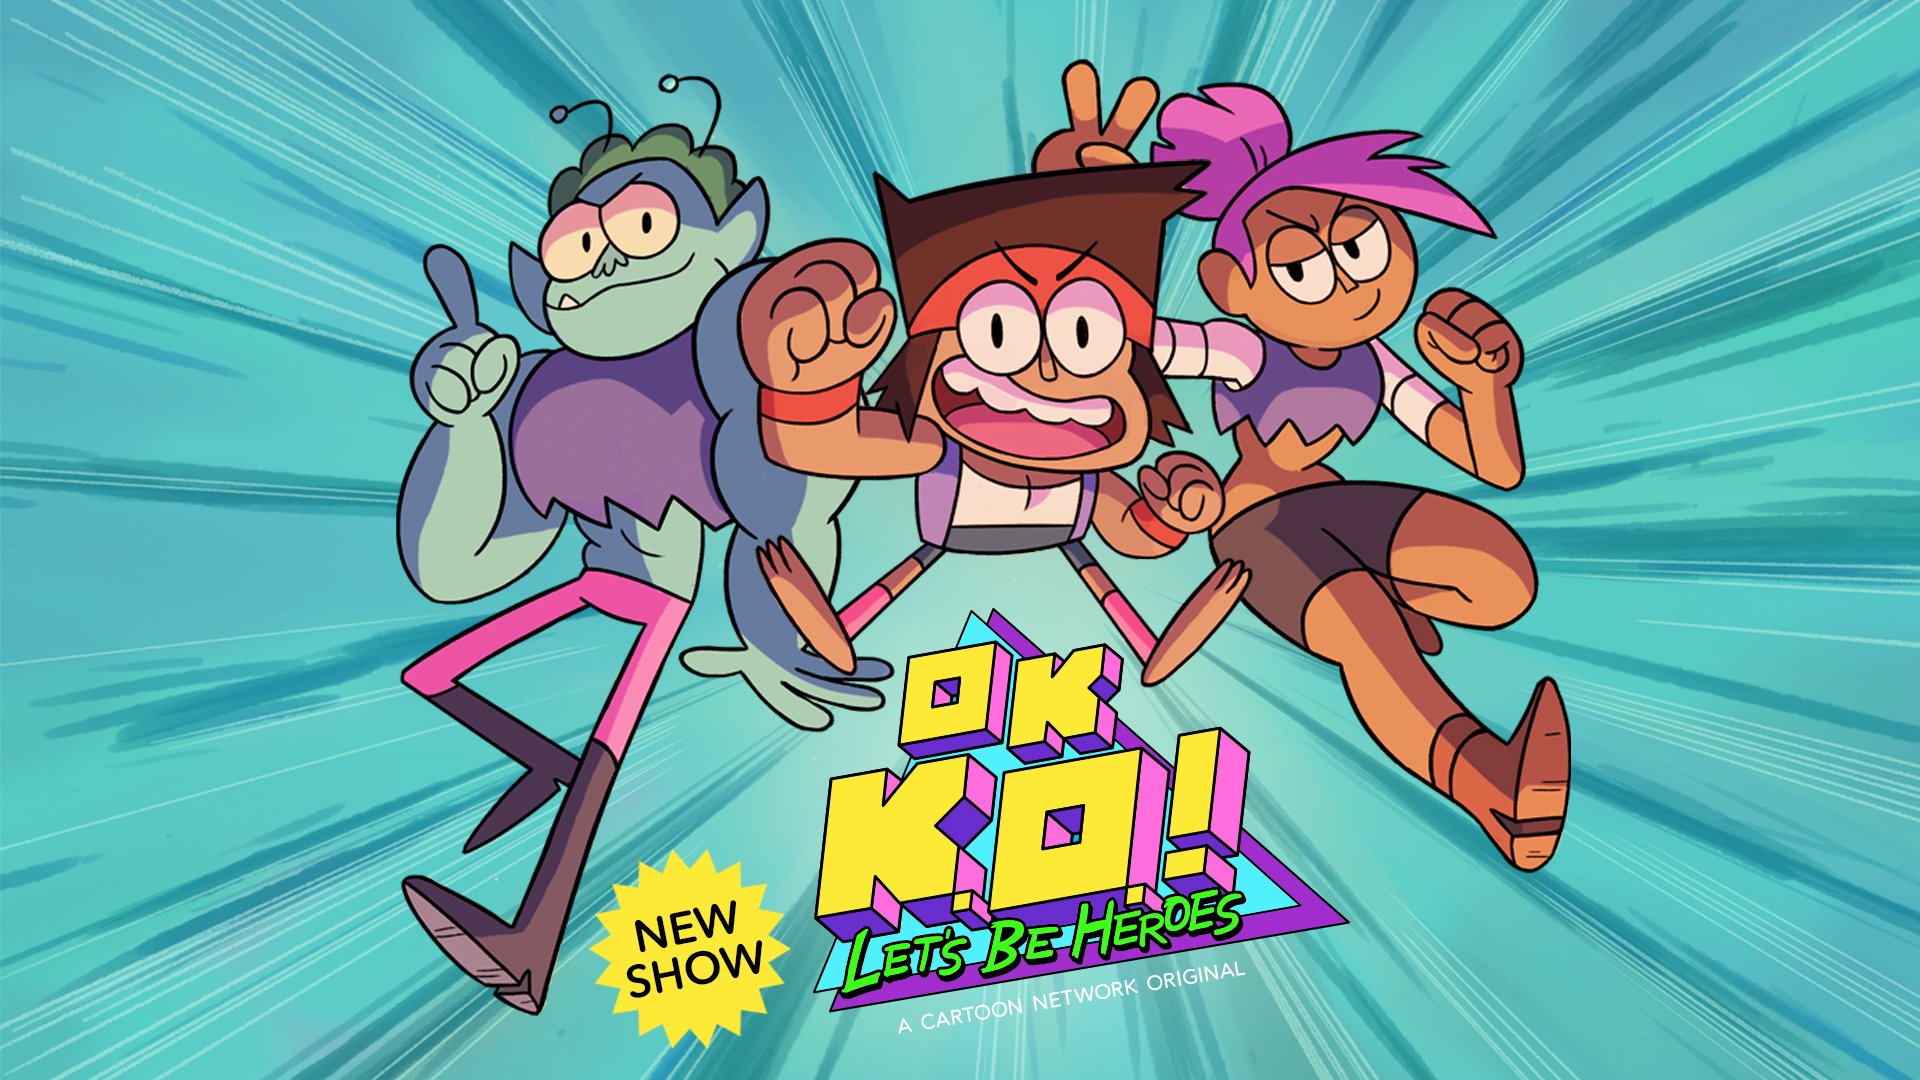 Start the year right with the newest animated show 'OK K.O.! Let's